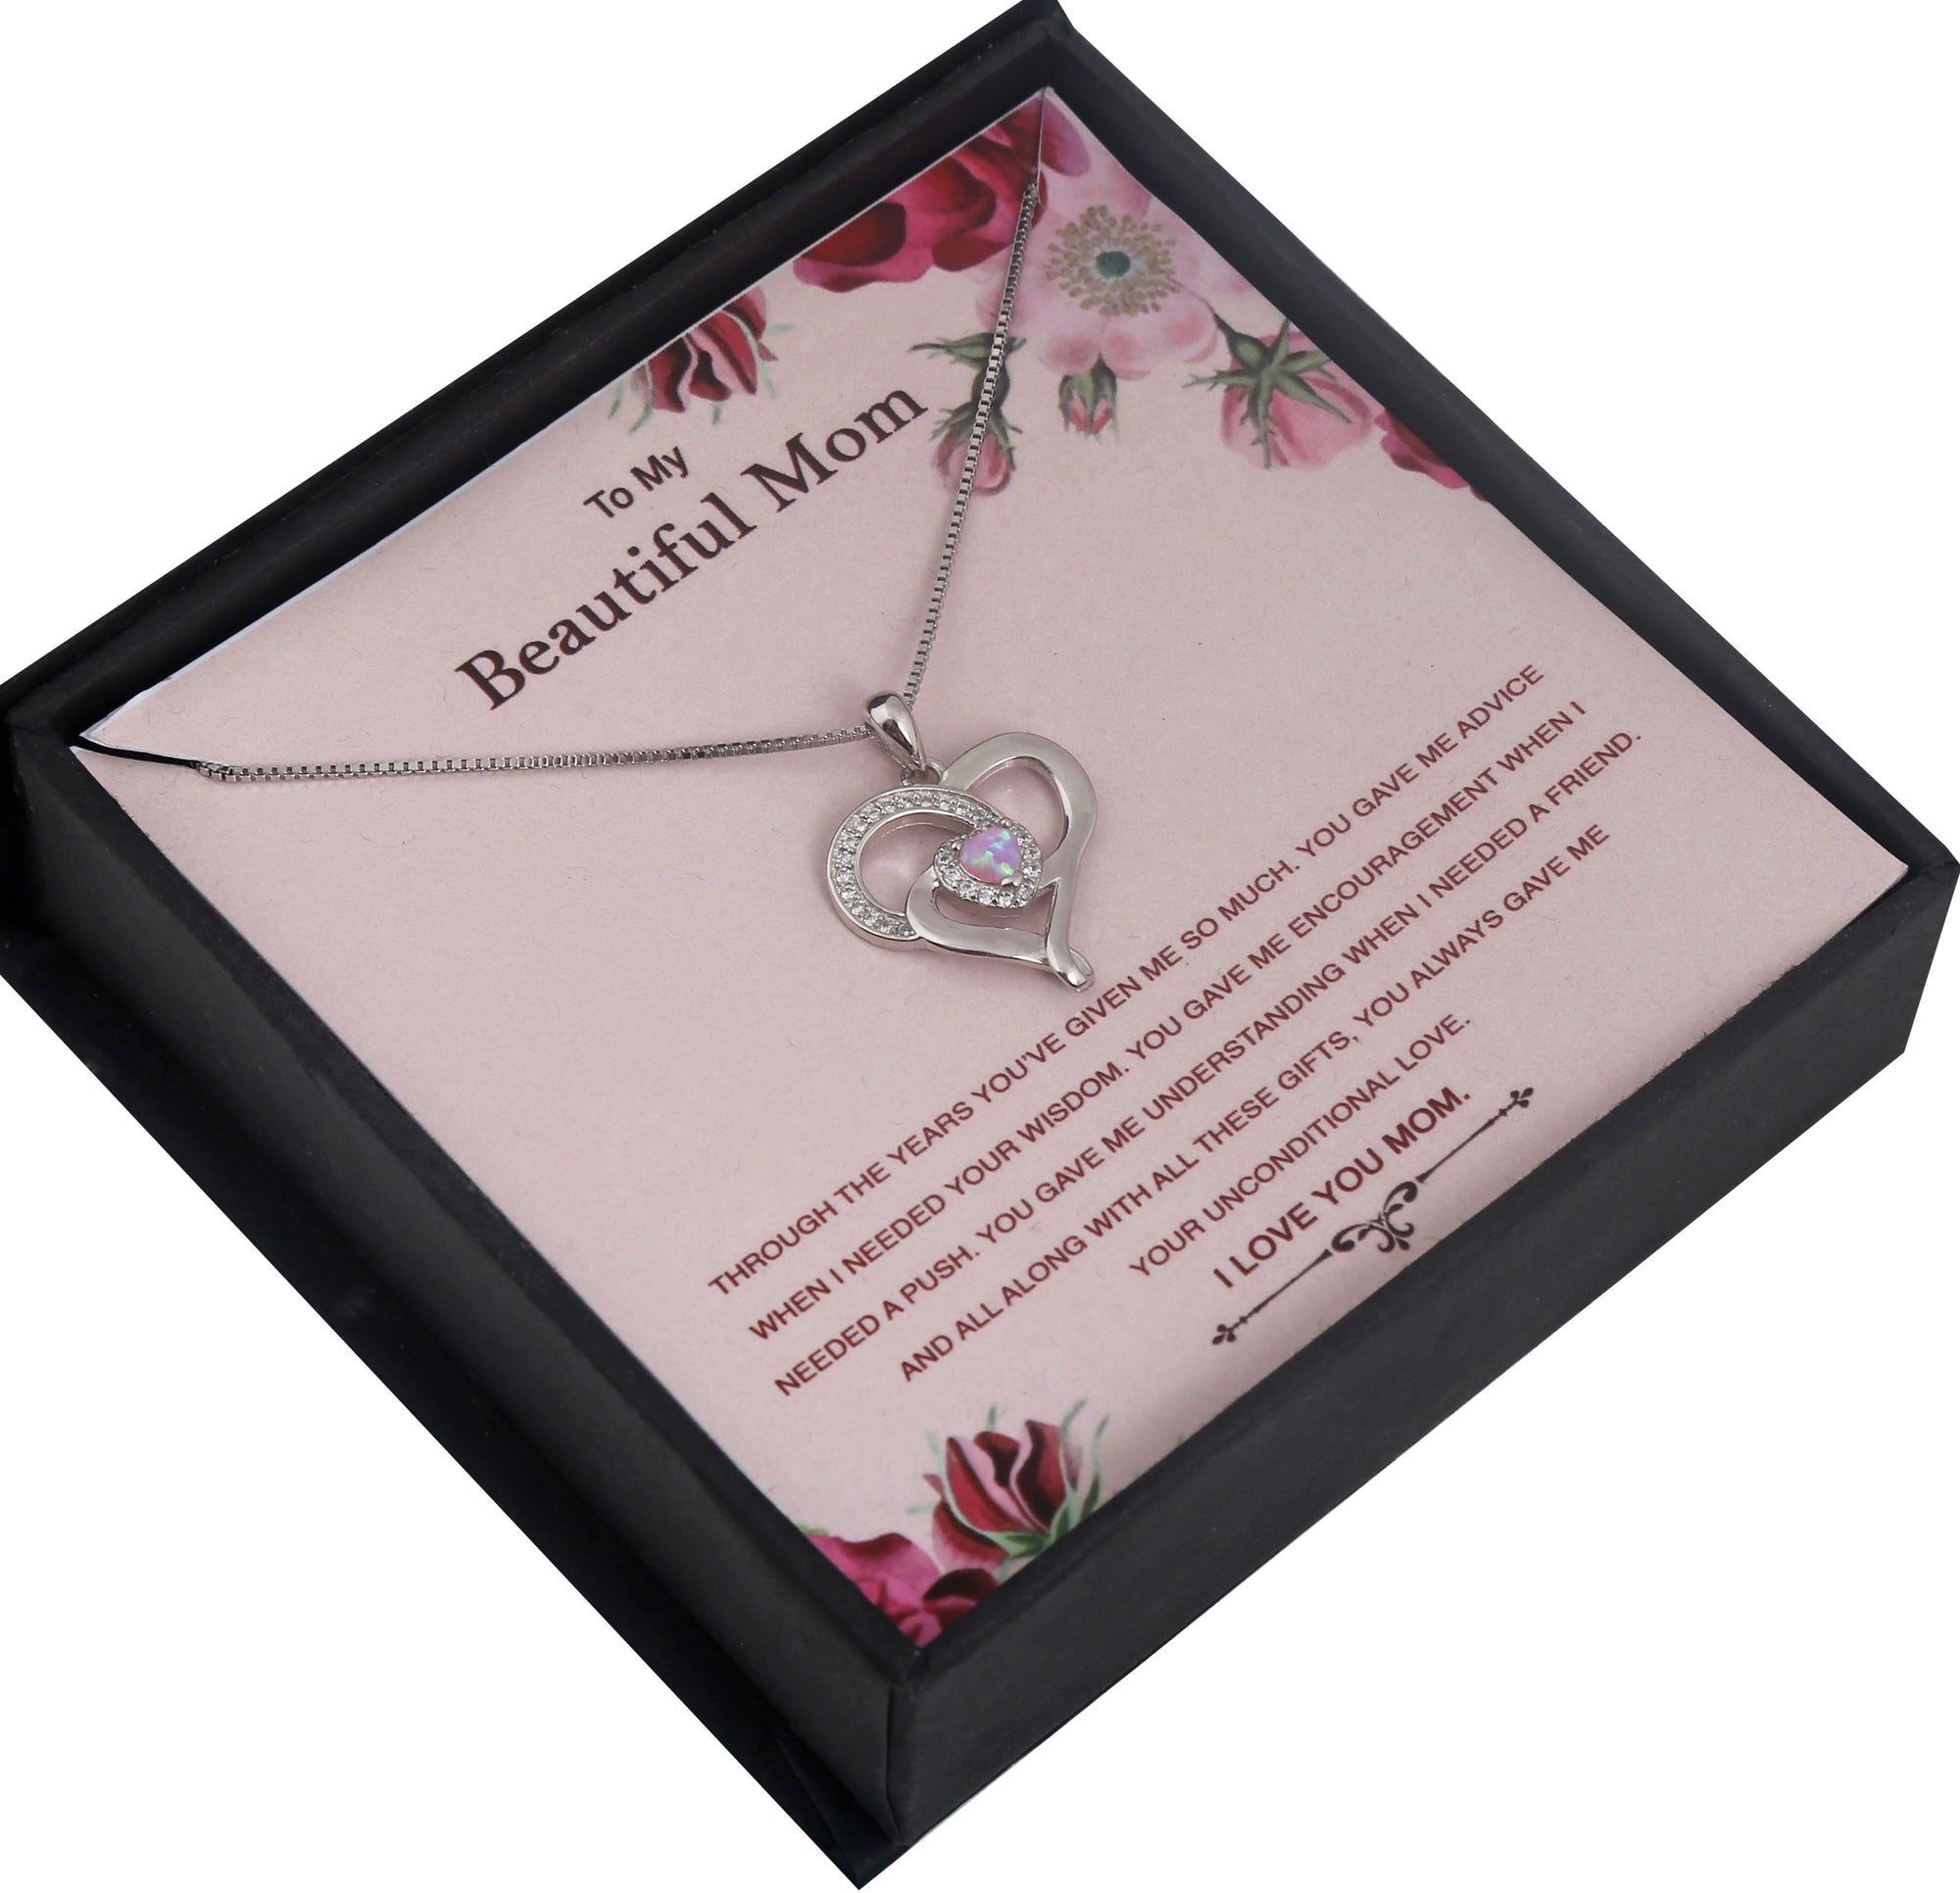 Mom Personalised Gift With Sterling Silver Pendant Necklace